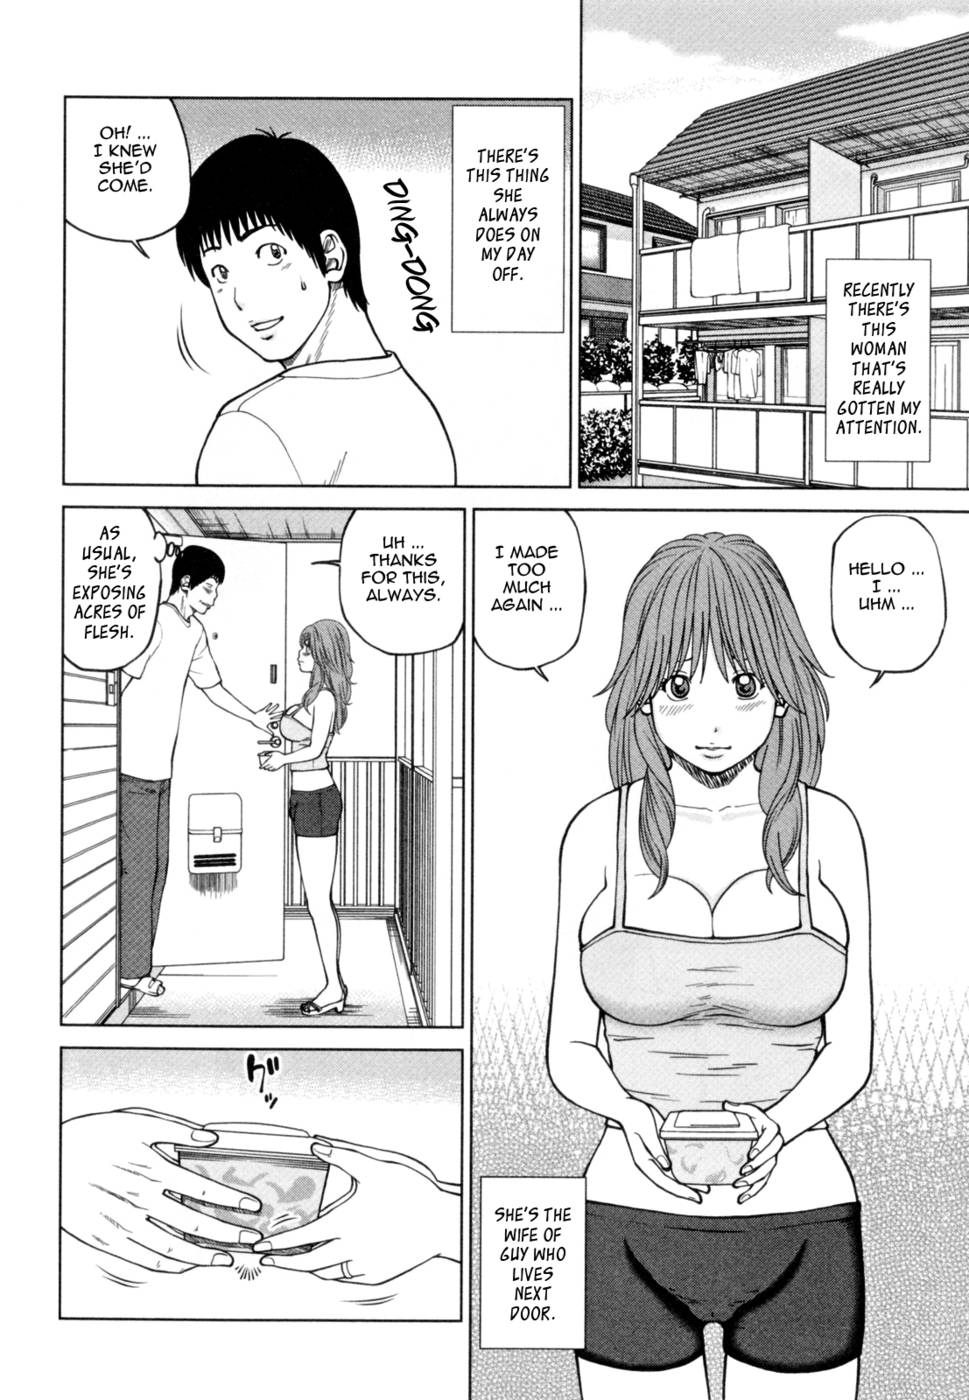 Hentai Manga Comic-32 Year Old Unsatisfied Wife-Chapter 10-The Wife Next Door-2